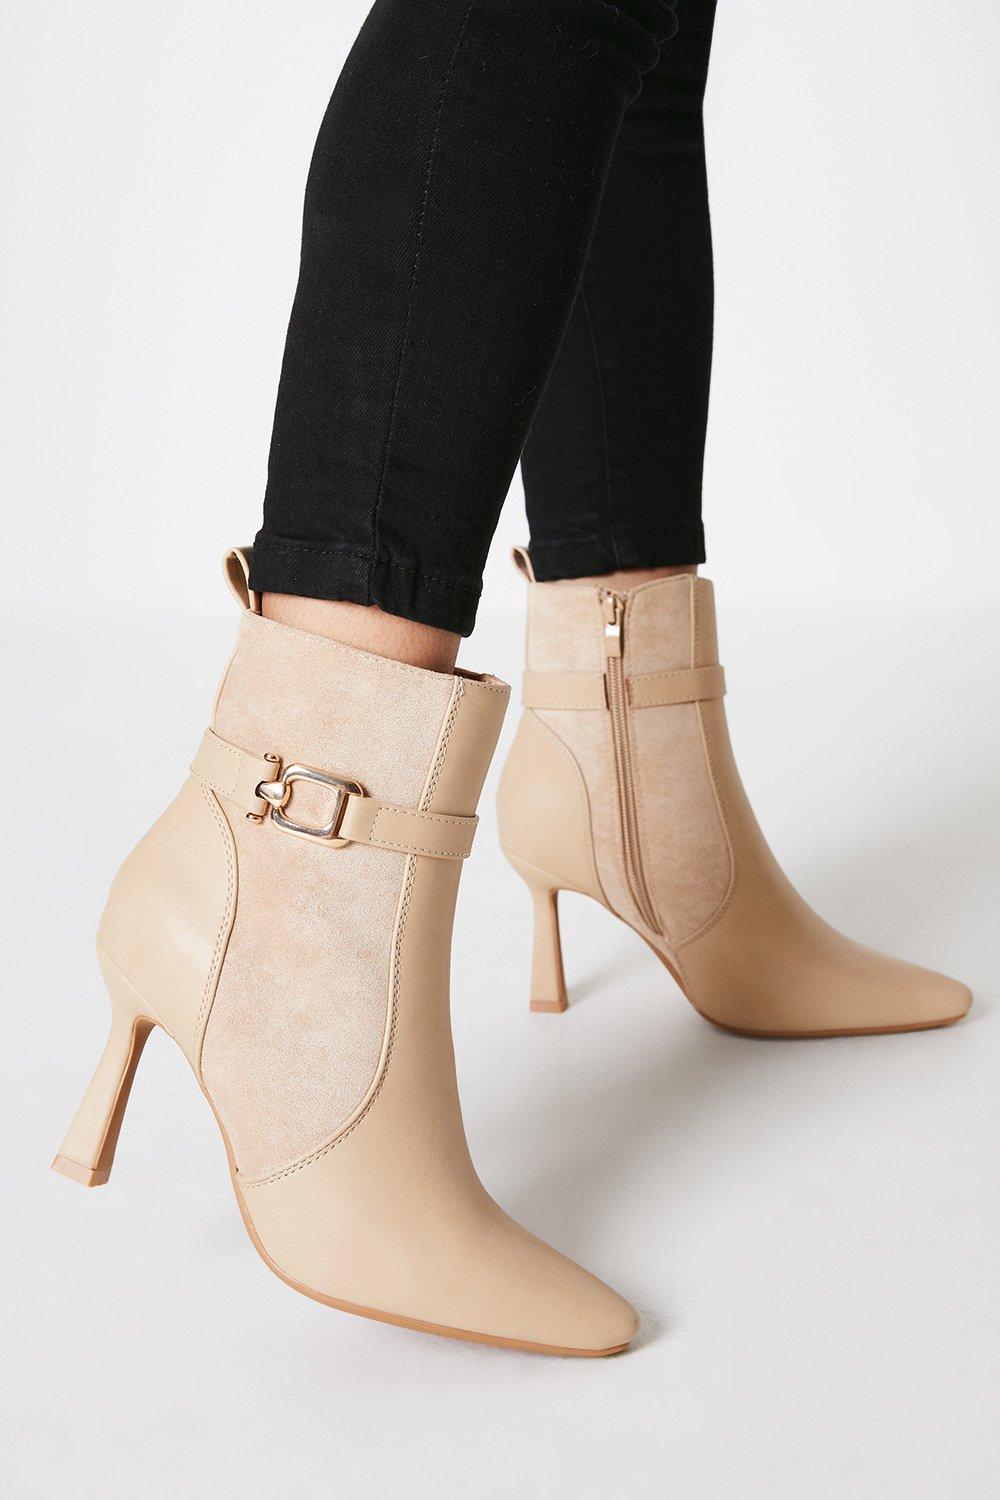 Women’s Faith: Madra Pointed Buckle High Heeled Ankle Boots - beige - 5